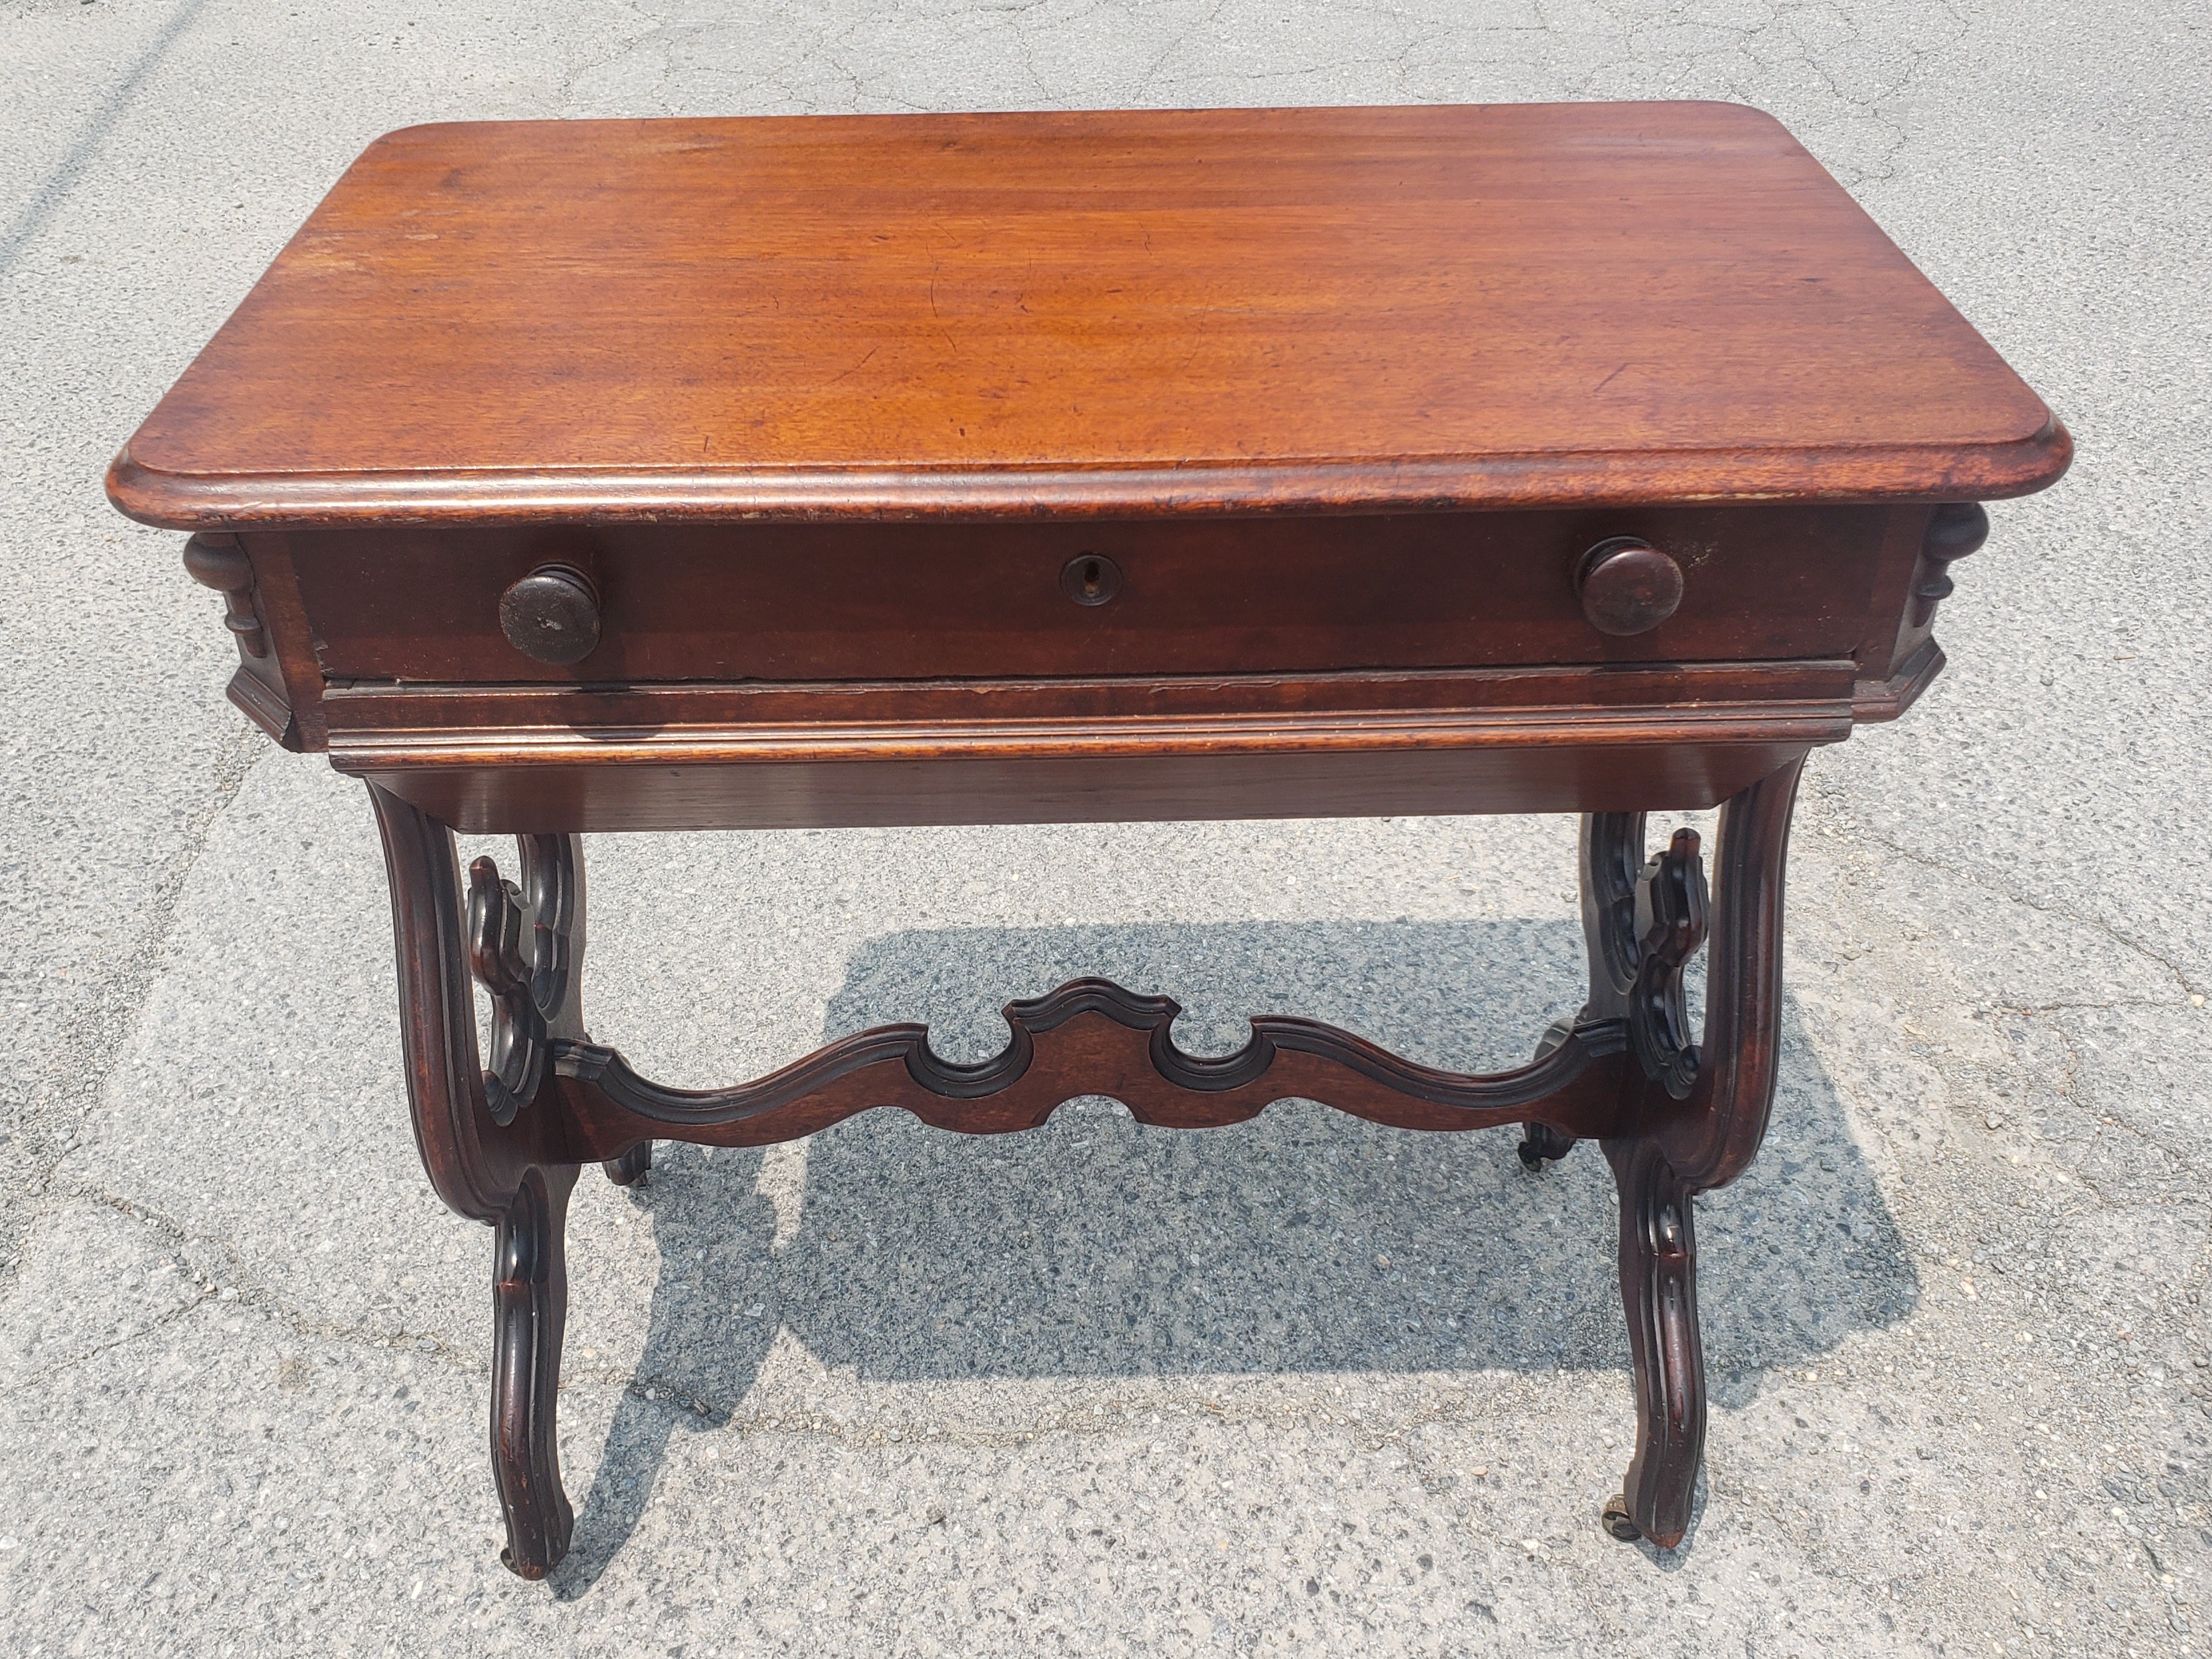 A 19th Century Victorian Rococo Style Carved Mahogany Sewing Table on wheels with a compartmented top drawer and large storage lower drawer.  Very good antique condition. 